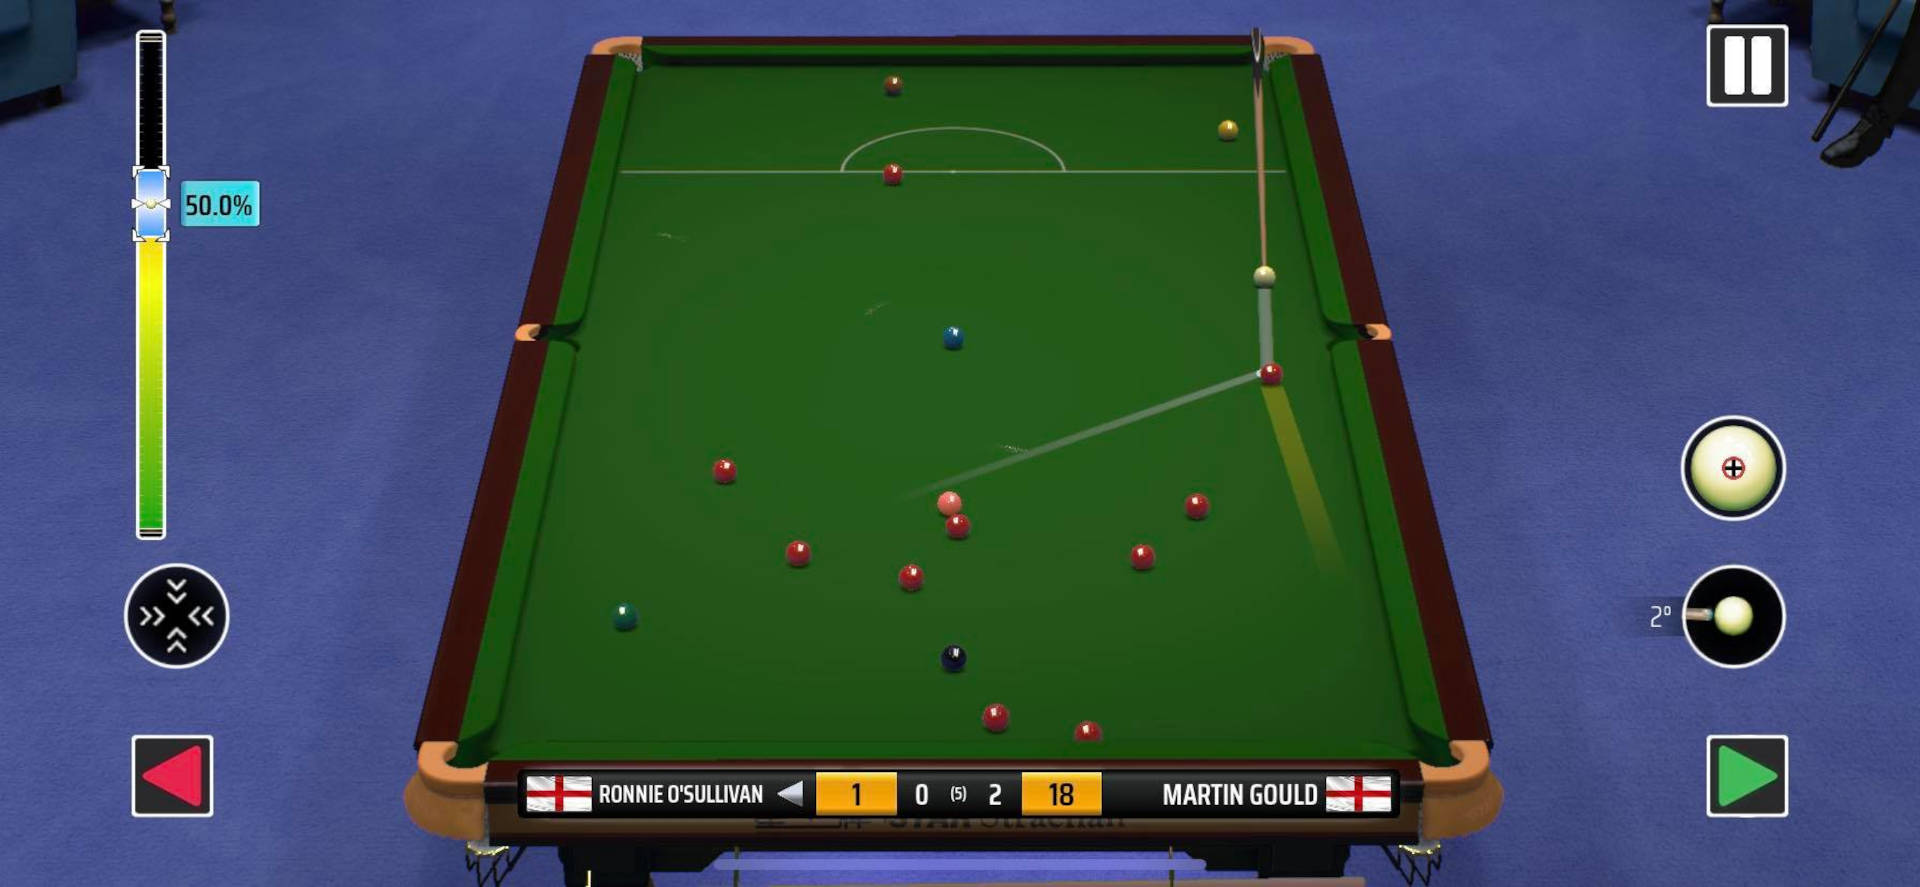 WST Snooker review